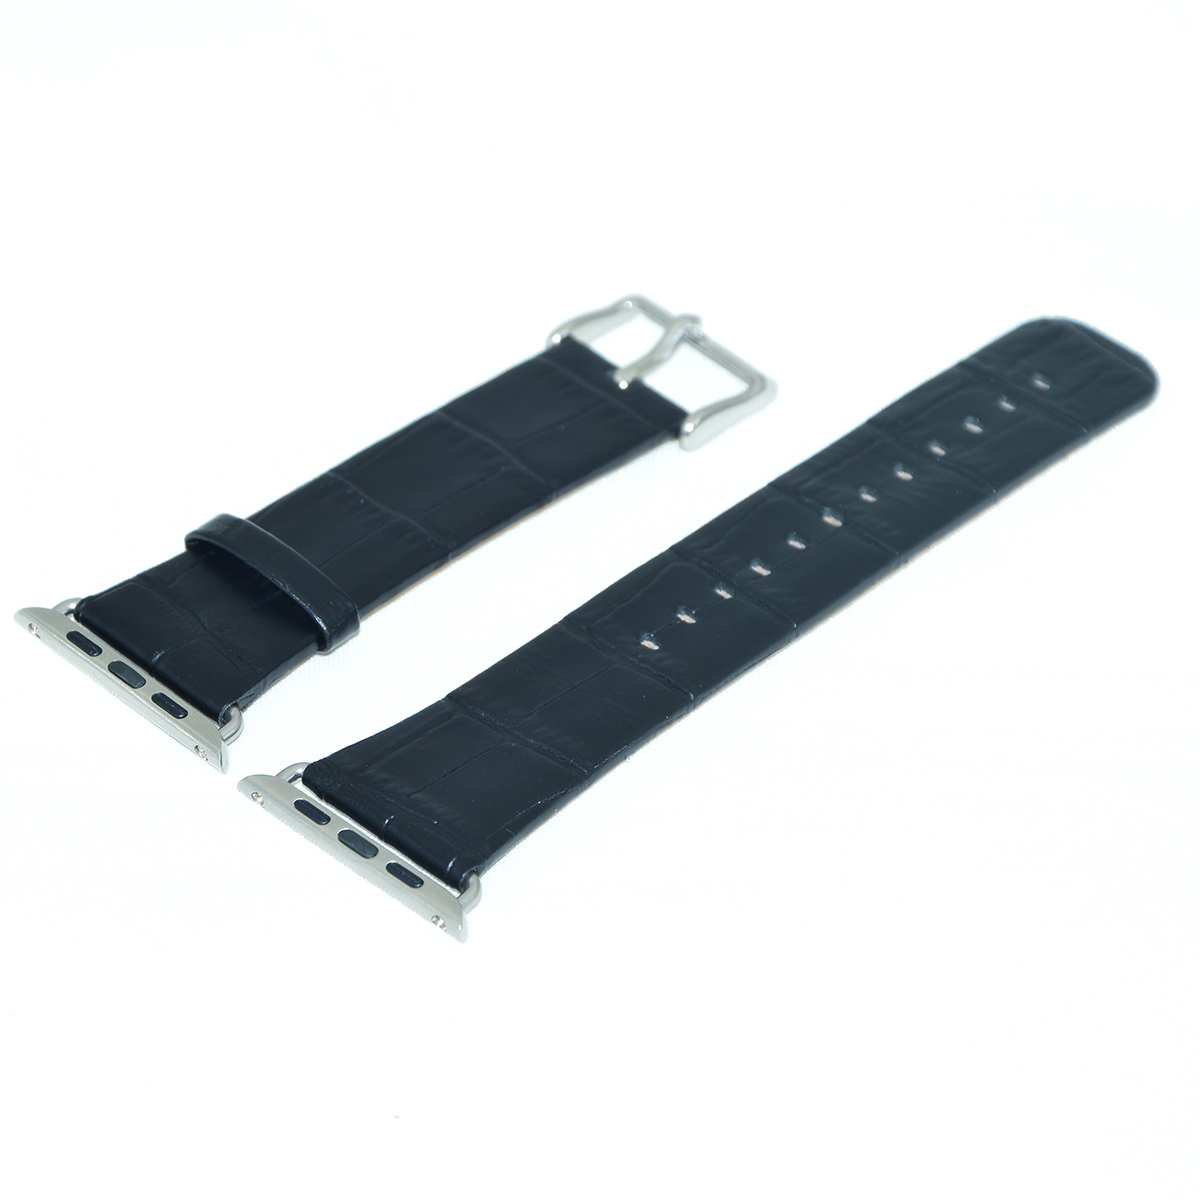 Find Leather Smart Watch Band Replacement Strap for Apple Watch 38mm for Sale on Gipsybee.com with cryptocurrencies